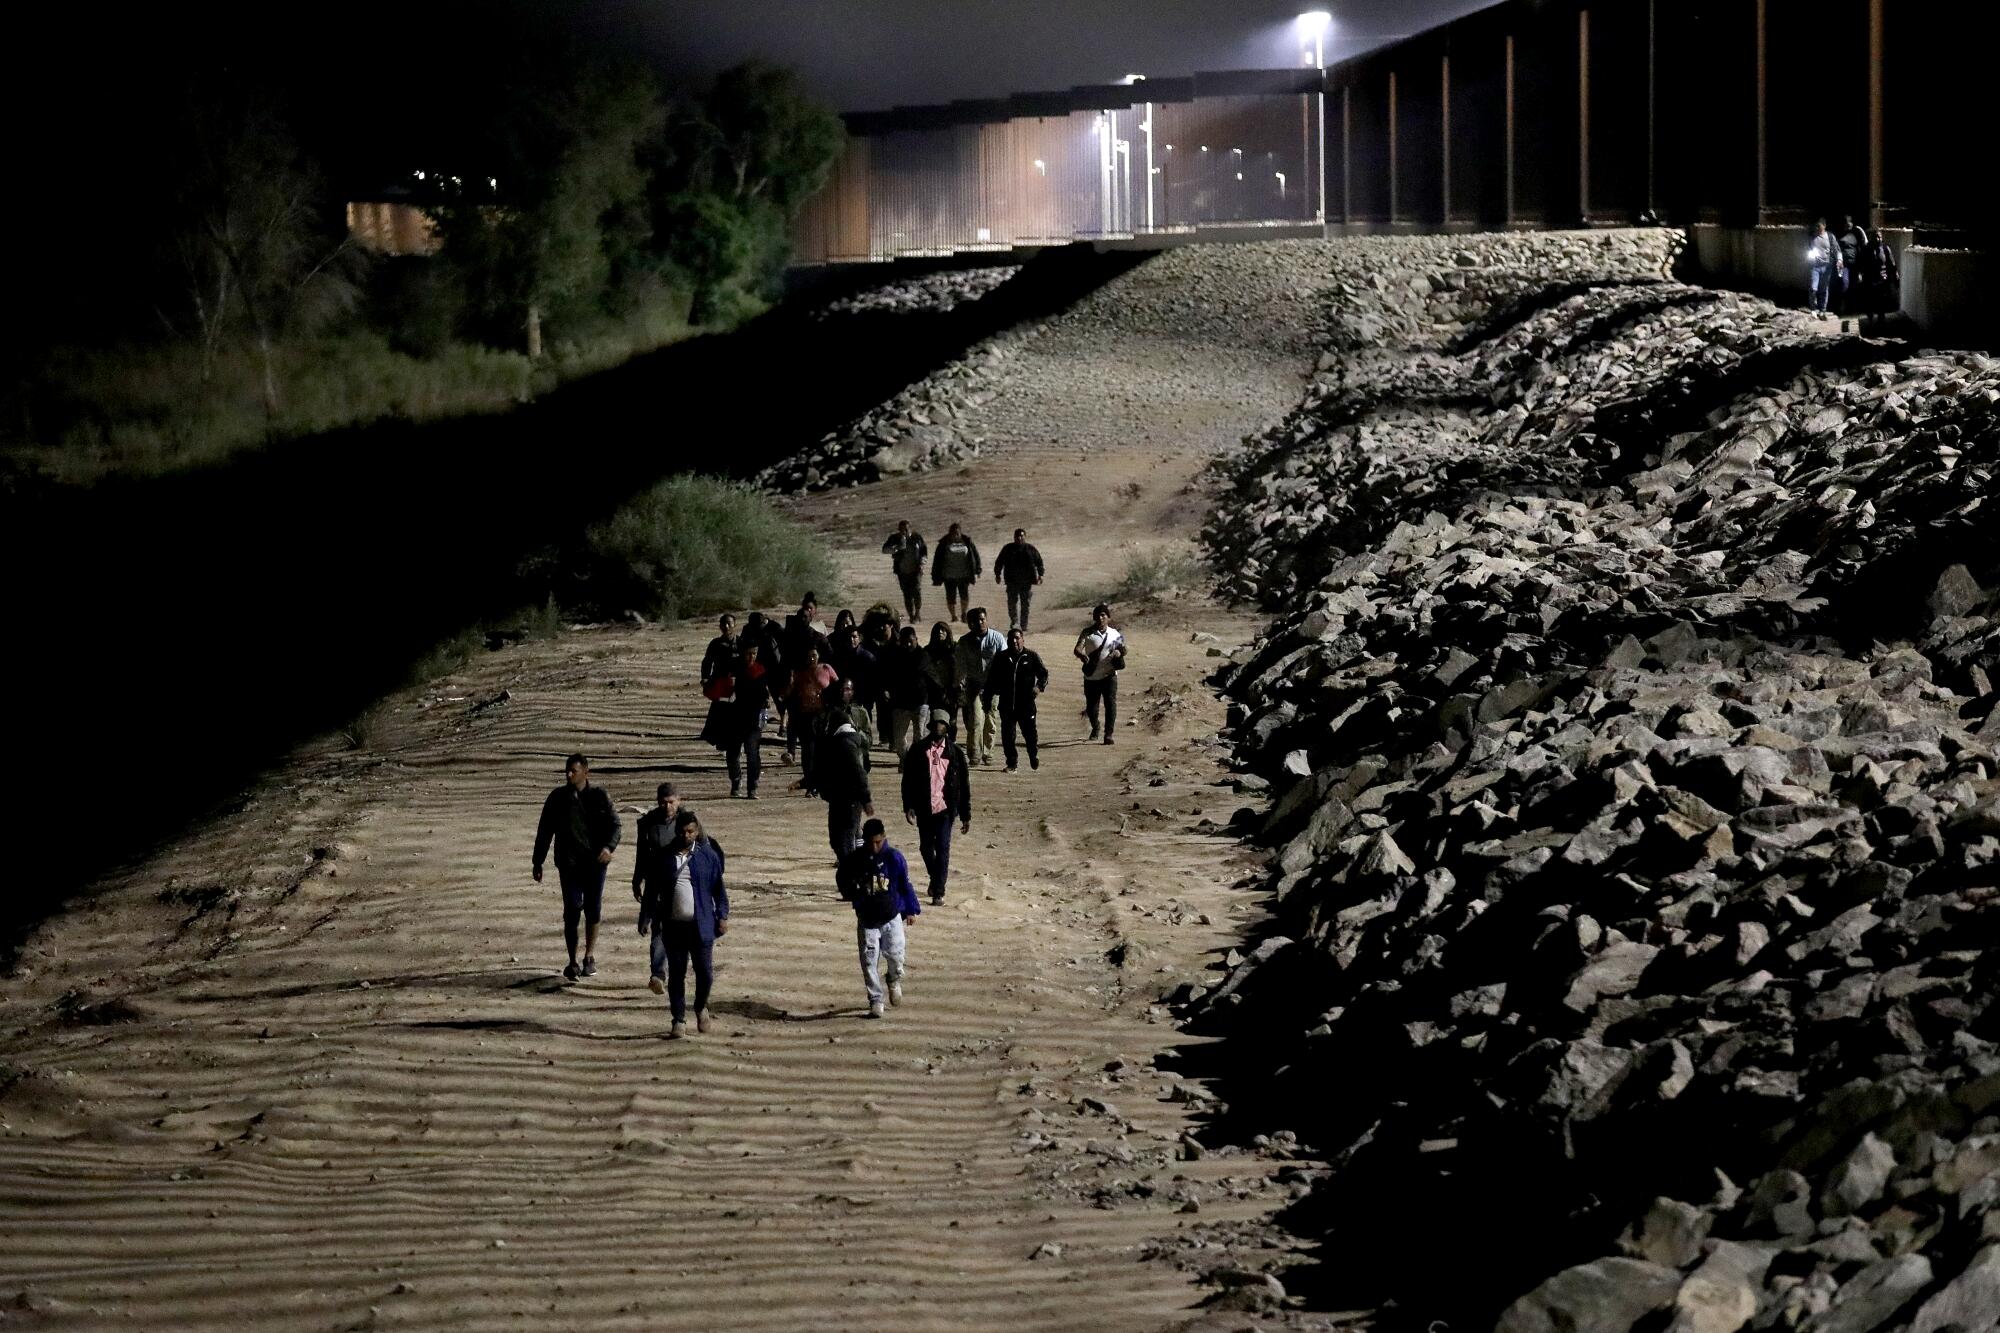 Immigrants turn themselves over to U.S Border Patrol agents along the U.S.-Mexico border in Somerton, Ariz., on May 11.